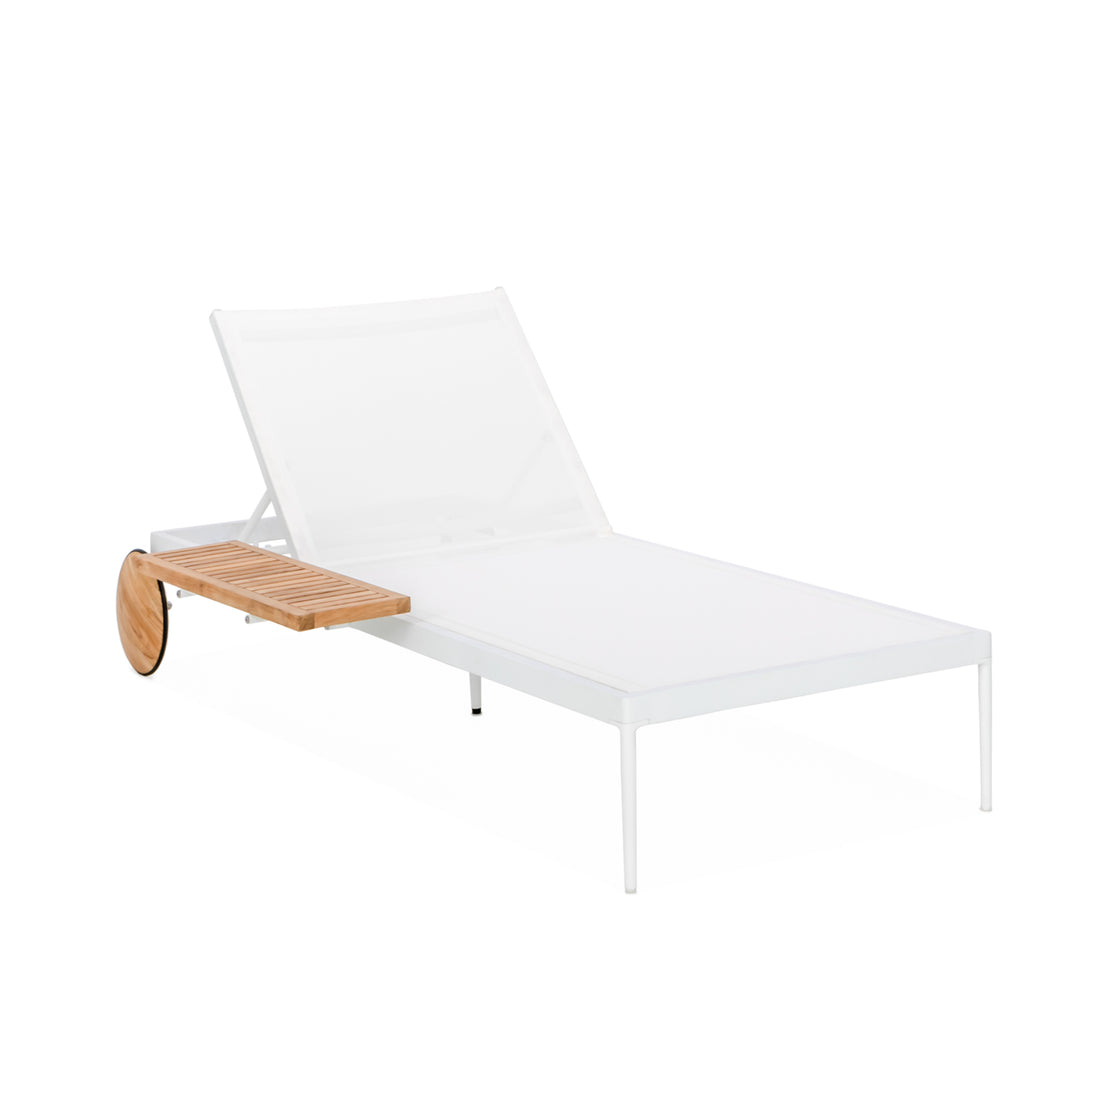 St. Barts Chaise Lounge White